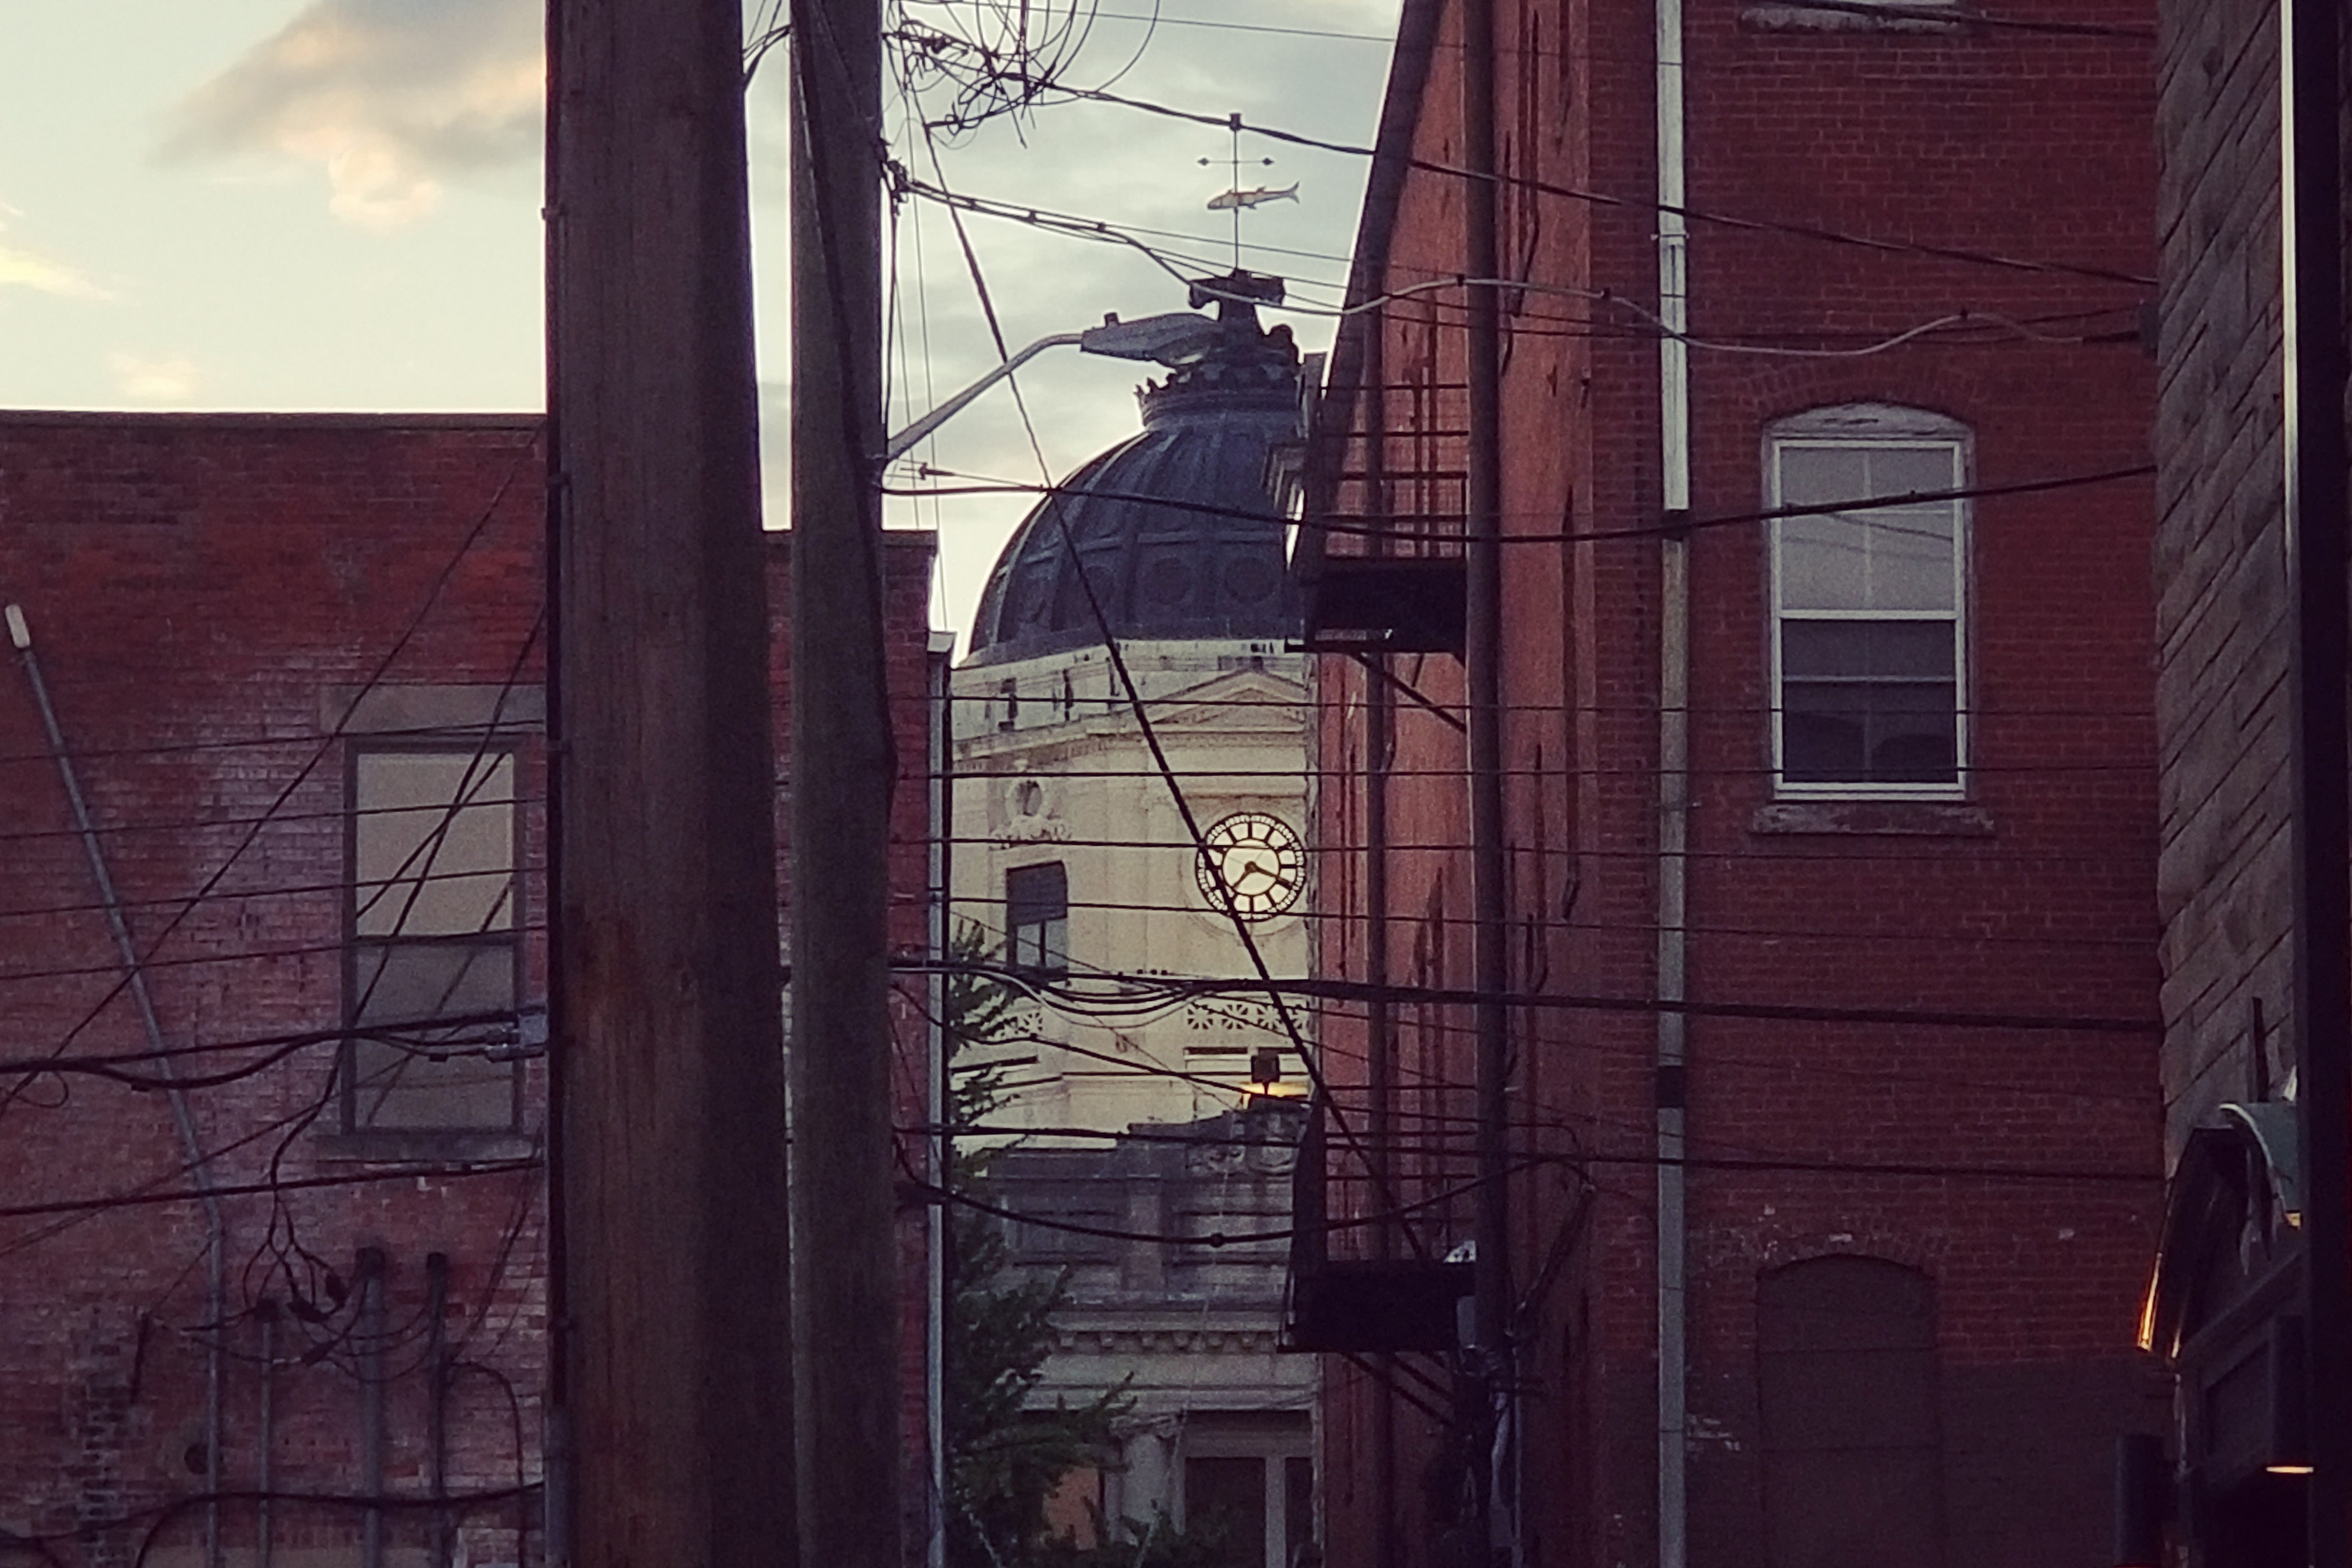 The dome of the old Bloomington courthouse shot through some buildings downtown.